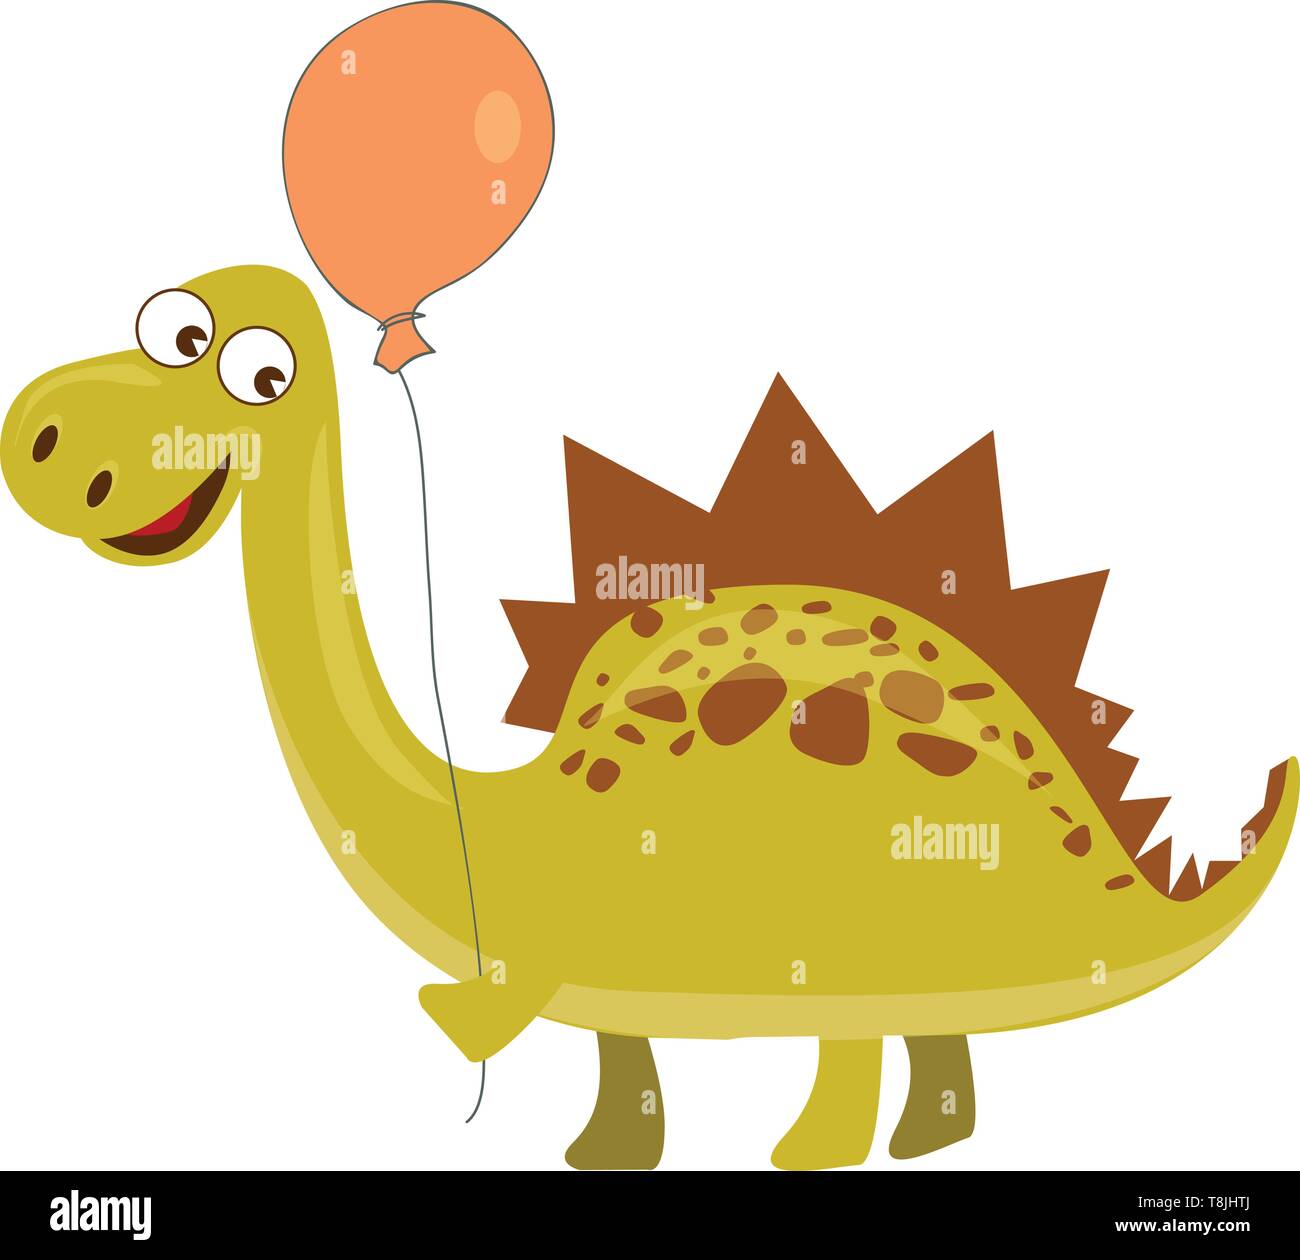 Yellow spinosaurus with brown spikes holing an orange balloon., vector, color drawing or illustration. Stock Vector